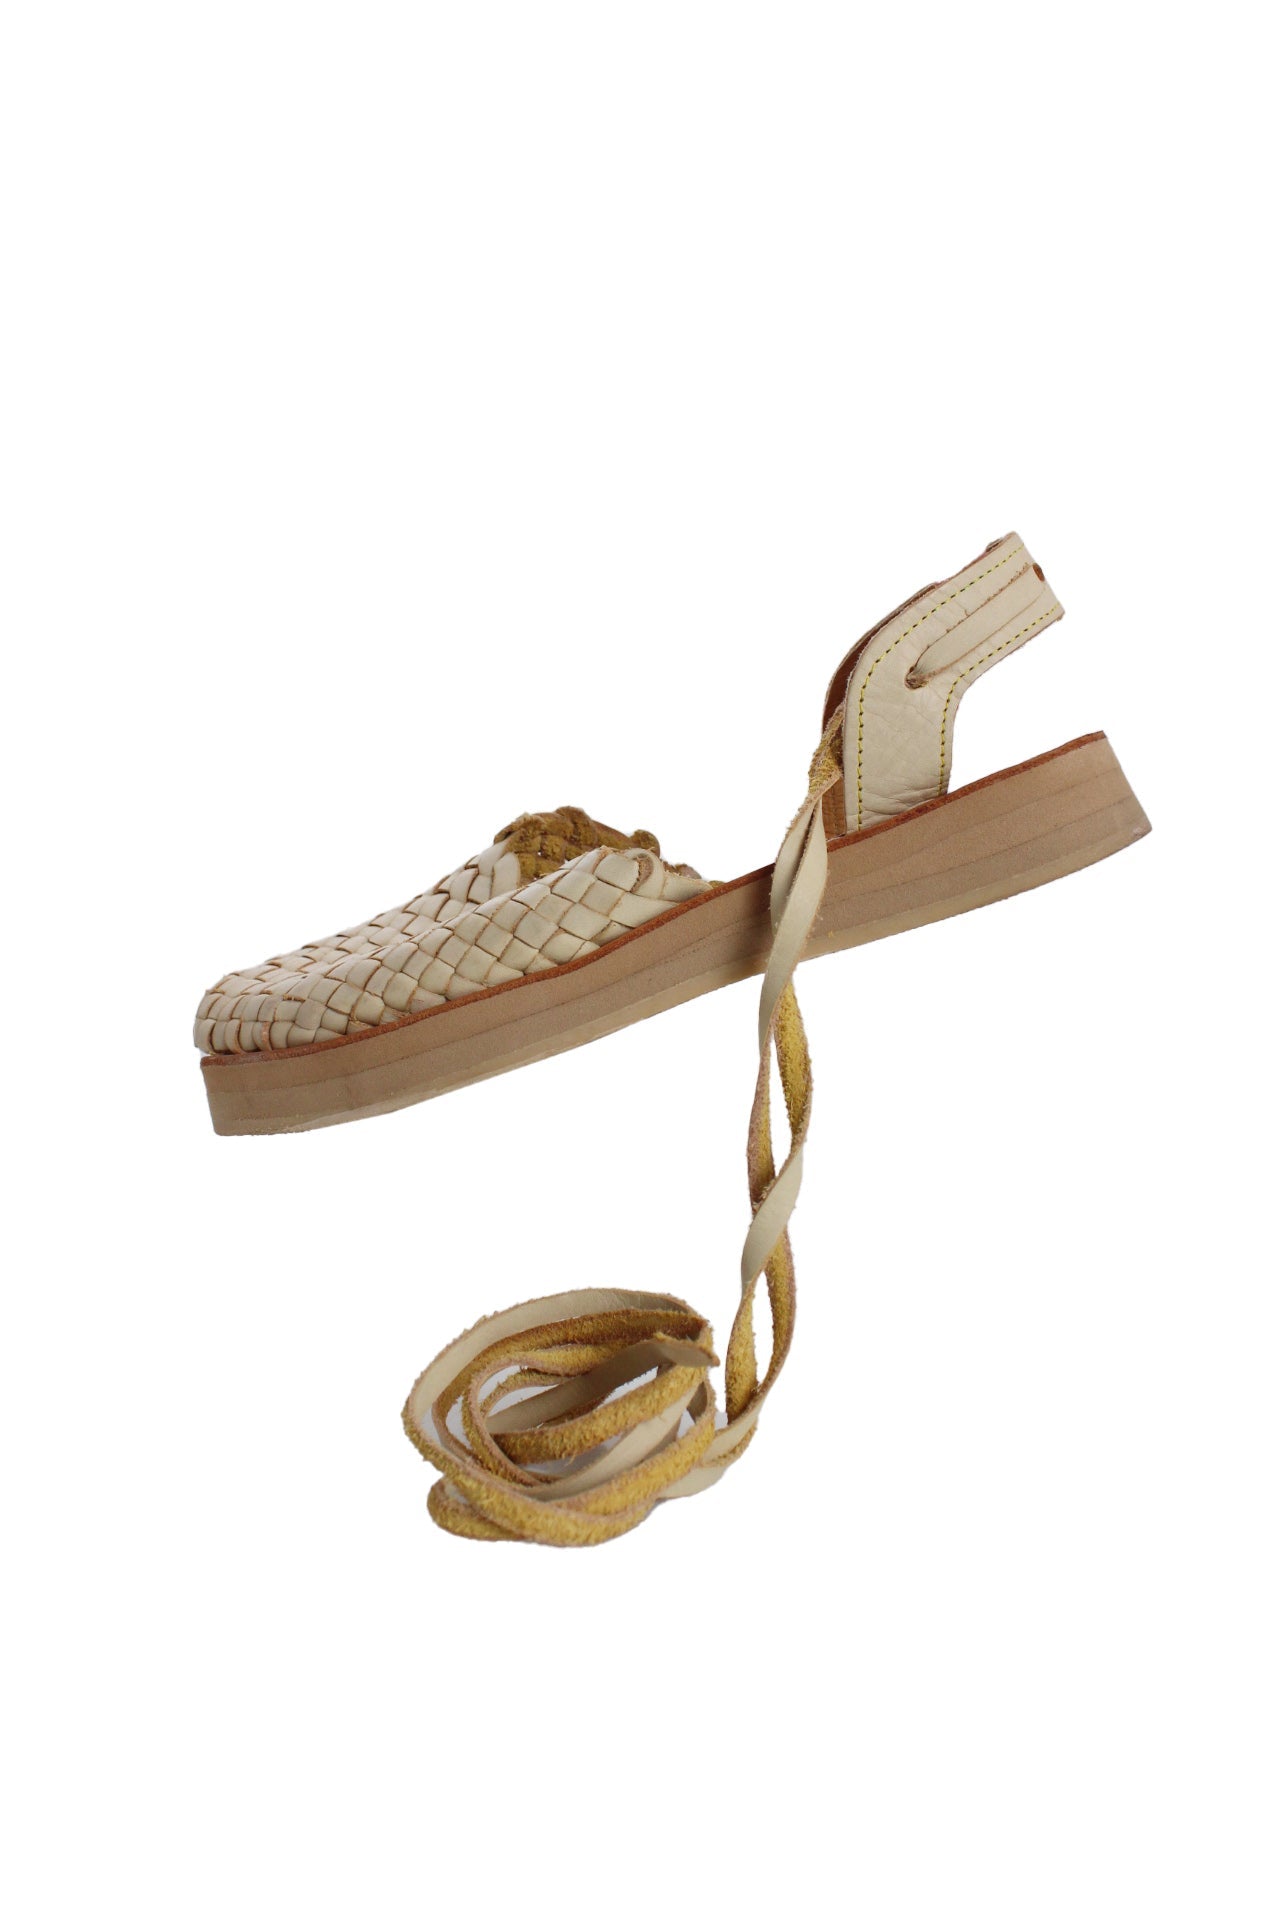 tilted side angle las tres marias beige woven leather sandals featuring woven leather front, back sling strap with lace-up ties, and stacked foam sole 1" sole. 